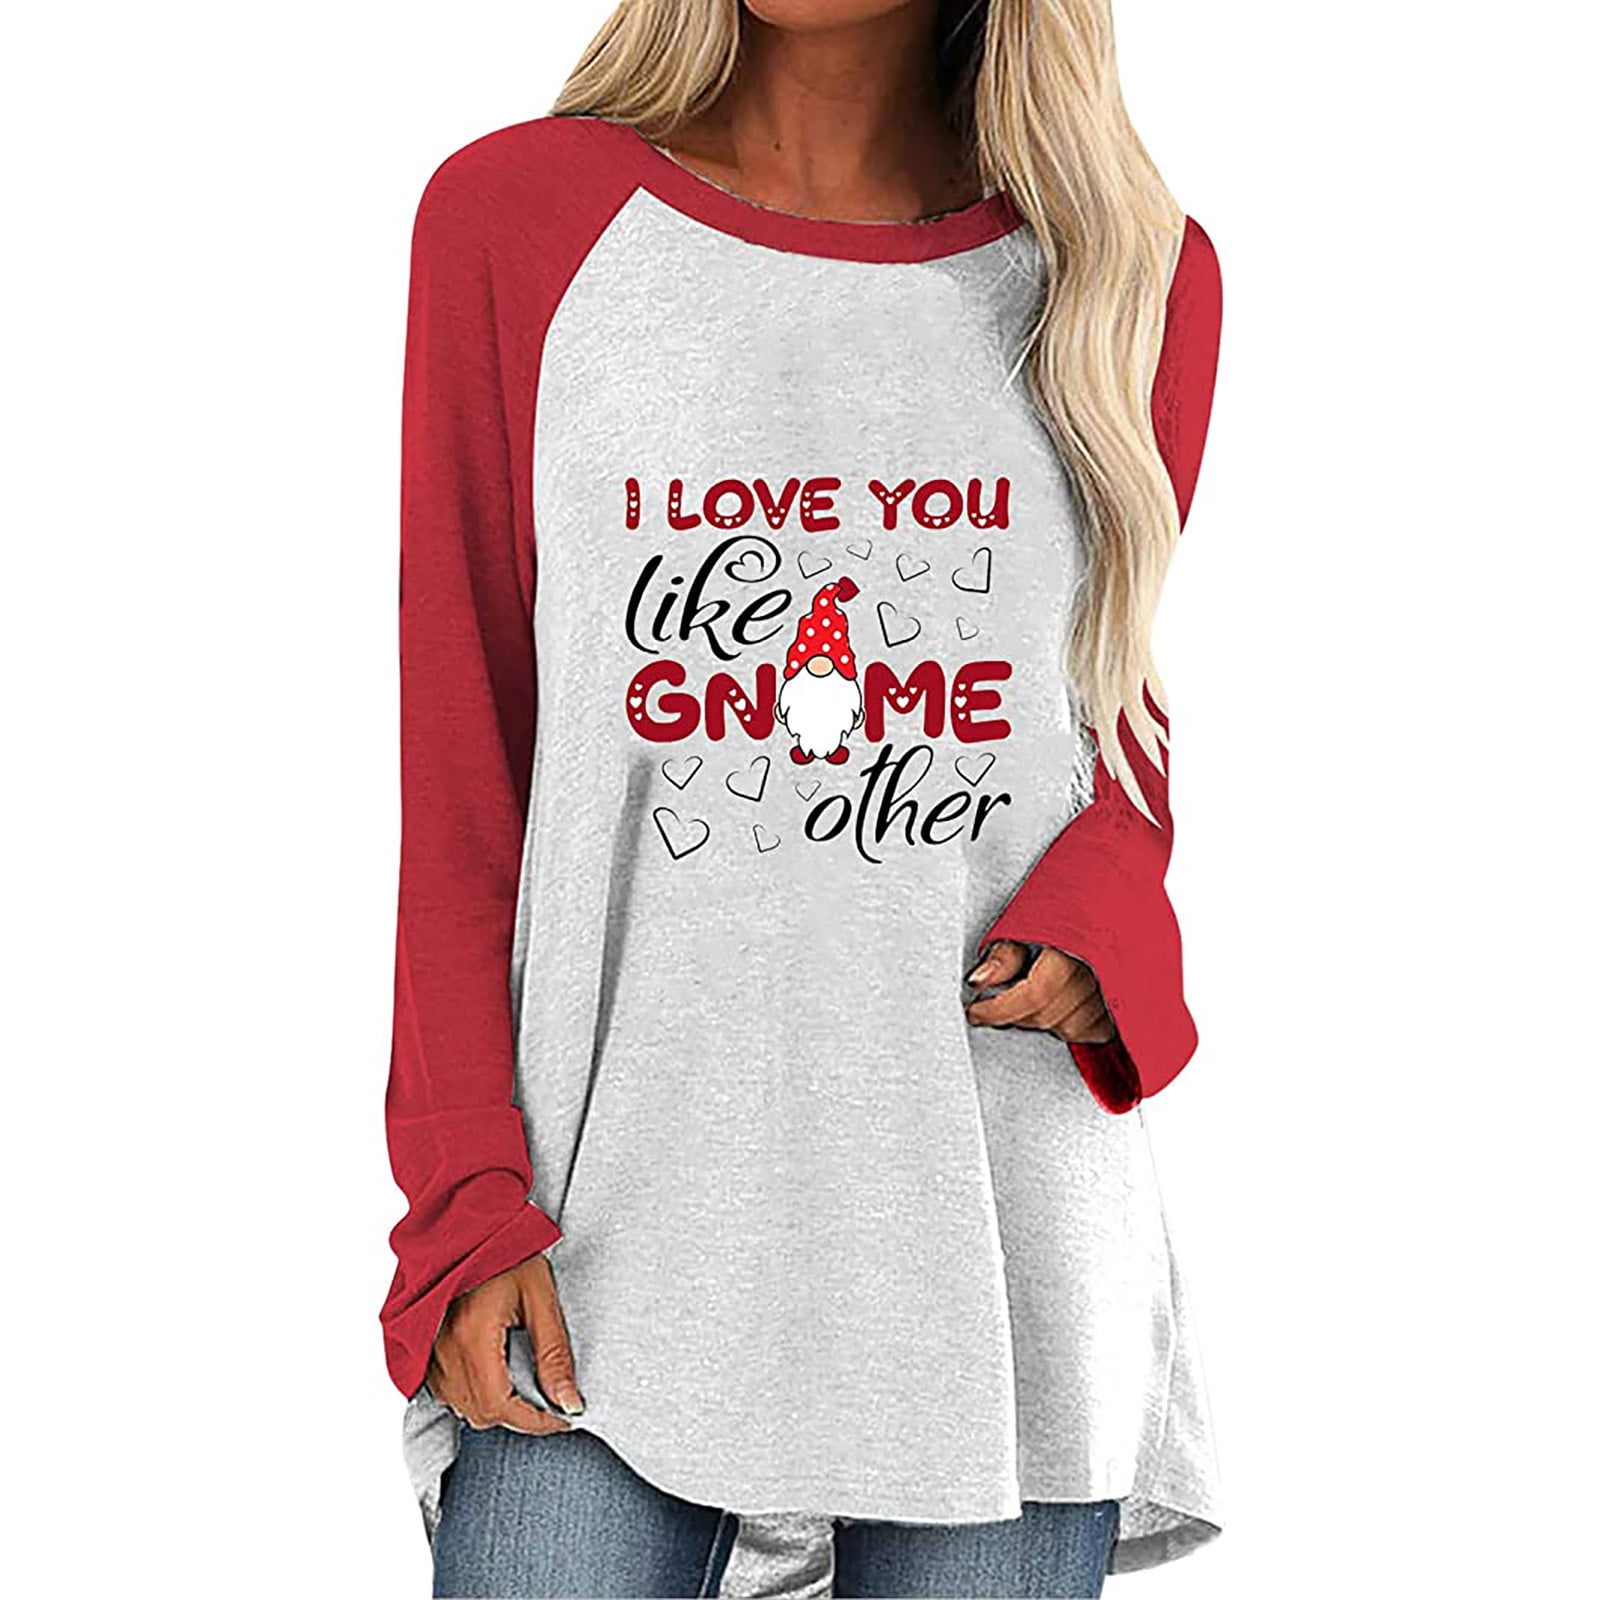  Womens Blouses Long Sleeve Long Sleeve Tunic Tops for Women  White Tank Tops Women Women Golf Shirts 1 Items one Dollar Items only   Daily Deals Deals of The Day Lightning